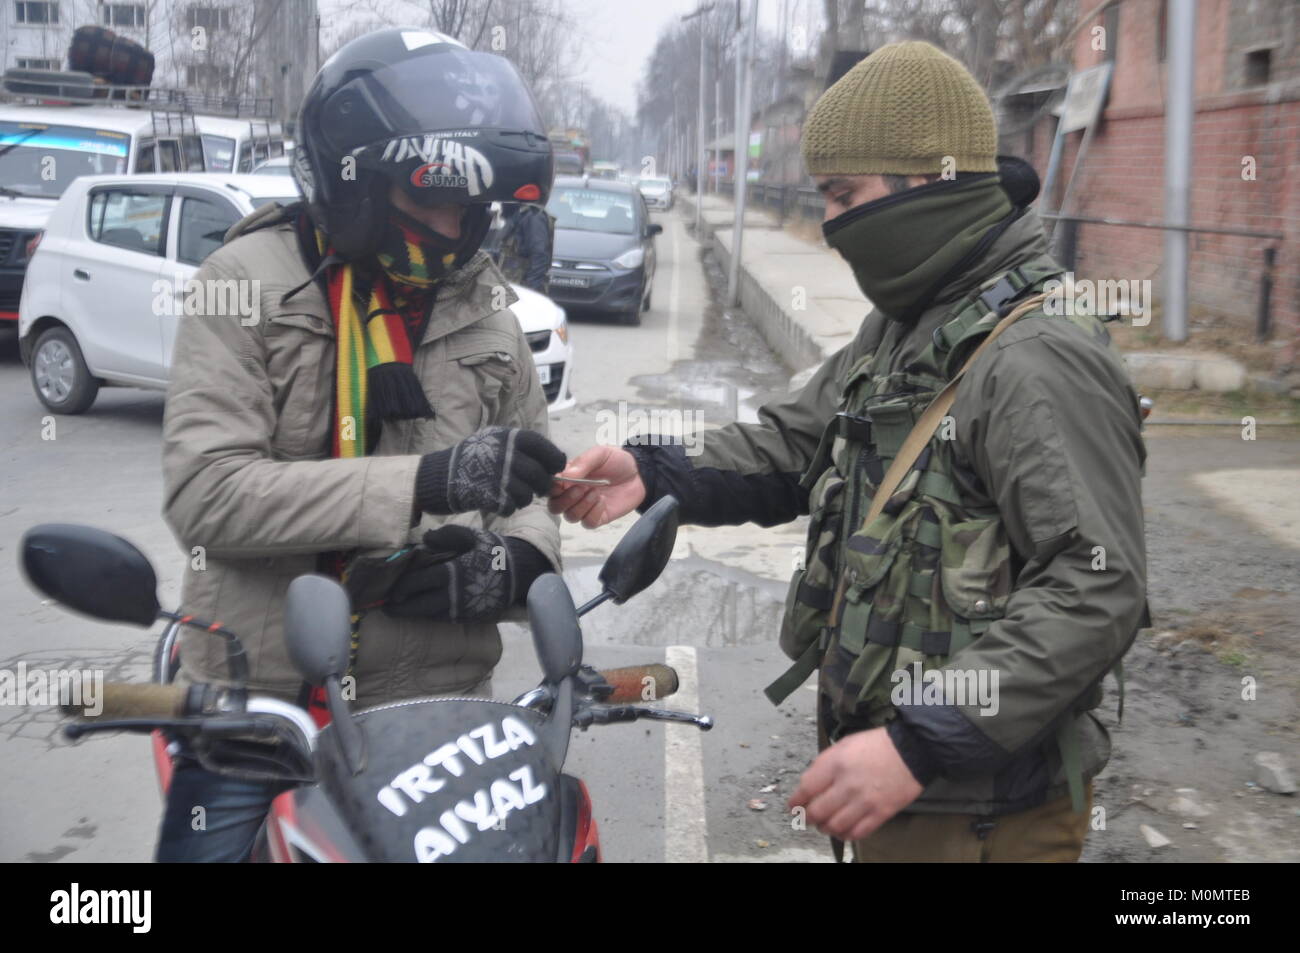 Police Man Checking The Identity Of A Man in Anantnag, Kashmir on January 23, 2018, ahead of Indian Republic Day on January 26. Stock Photo